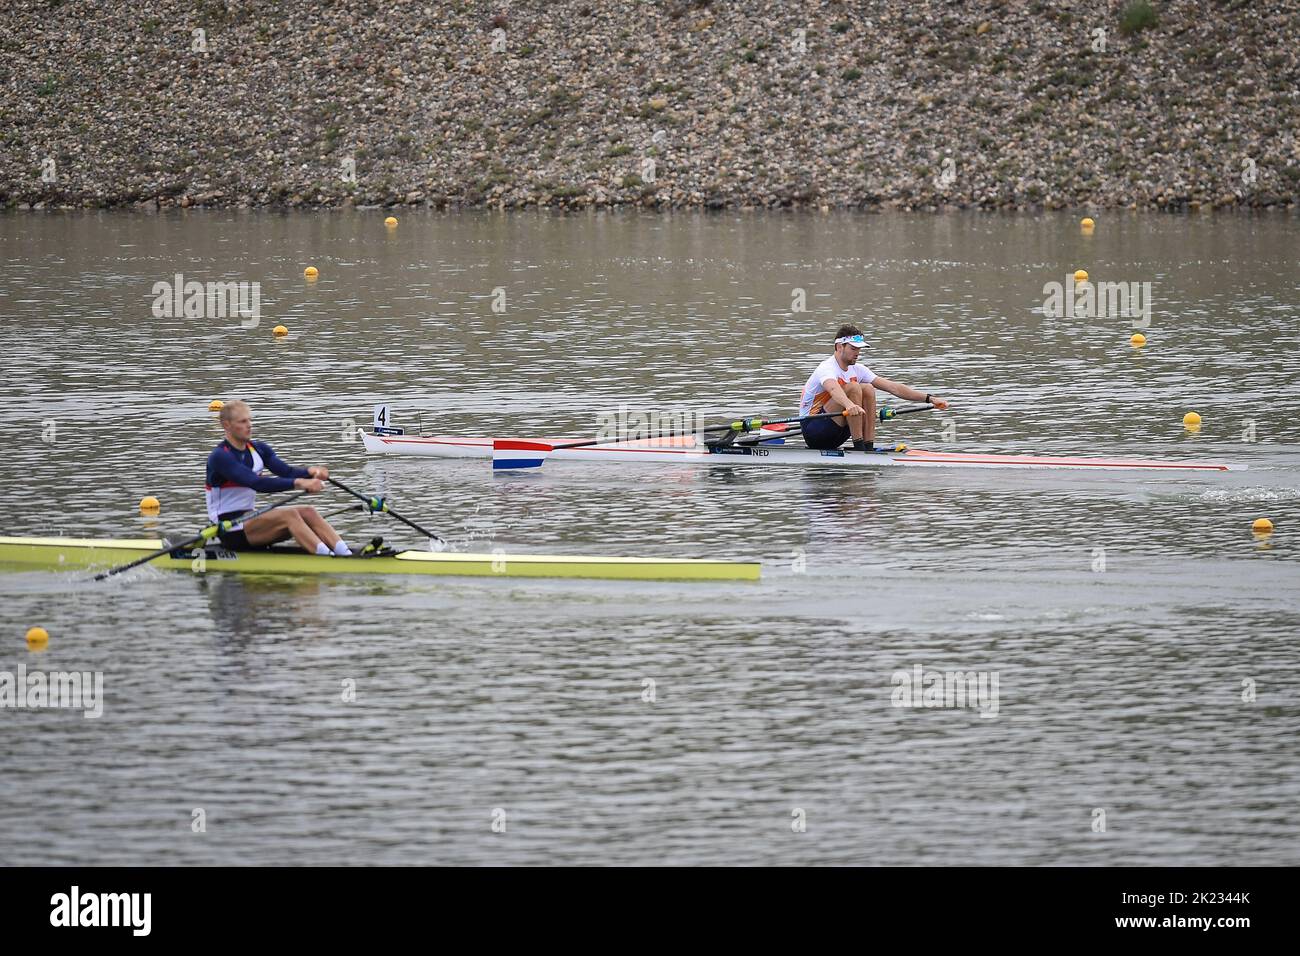 Racice, Czech Republic - September 21: Melvin Twellaar of Netherlands and Oliver Zeidler of Germany, competing on Men's sculls quarter finals during Day 4 of the 2022 World Rowing Championships at the Labe Arena Racice on September 21, 2022 in Racice, Czech Republic. (Vit Cerny/CTK Photo/BSR Agency) Stock Photo